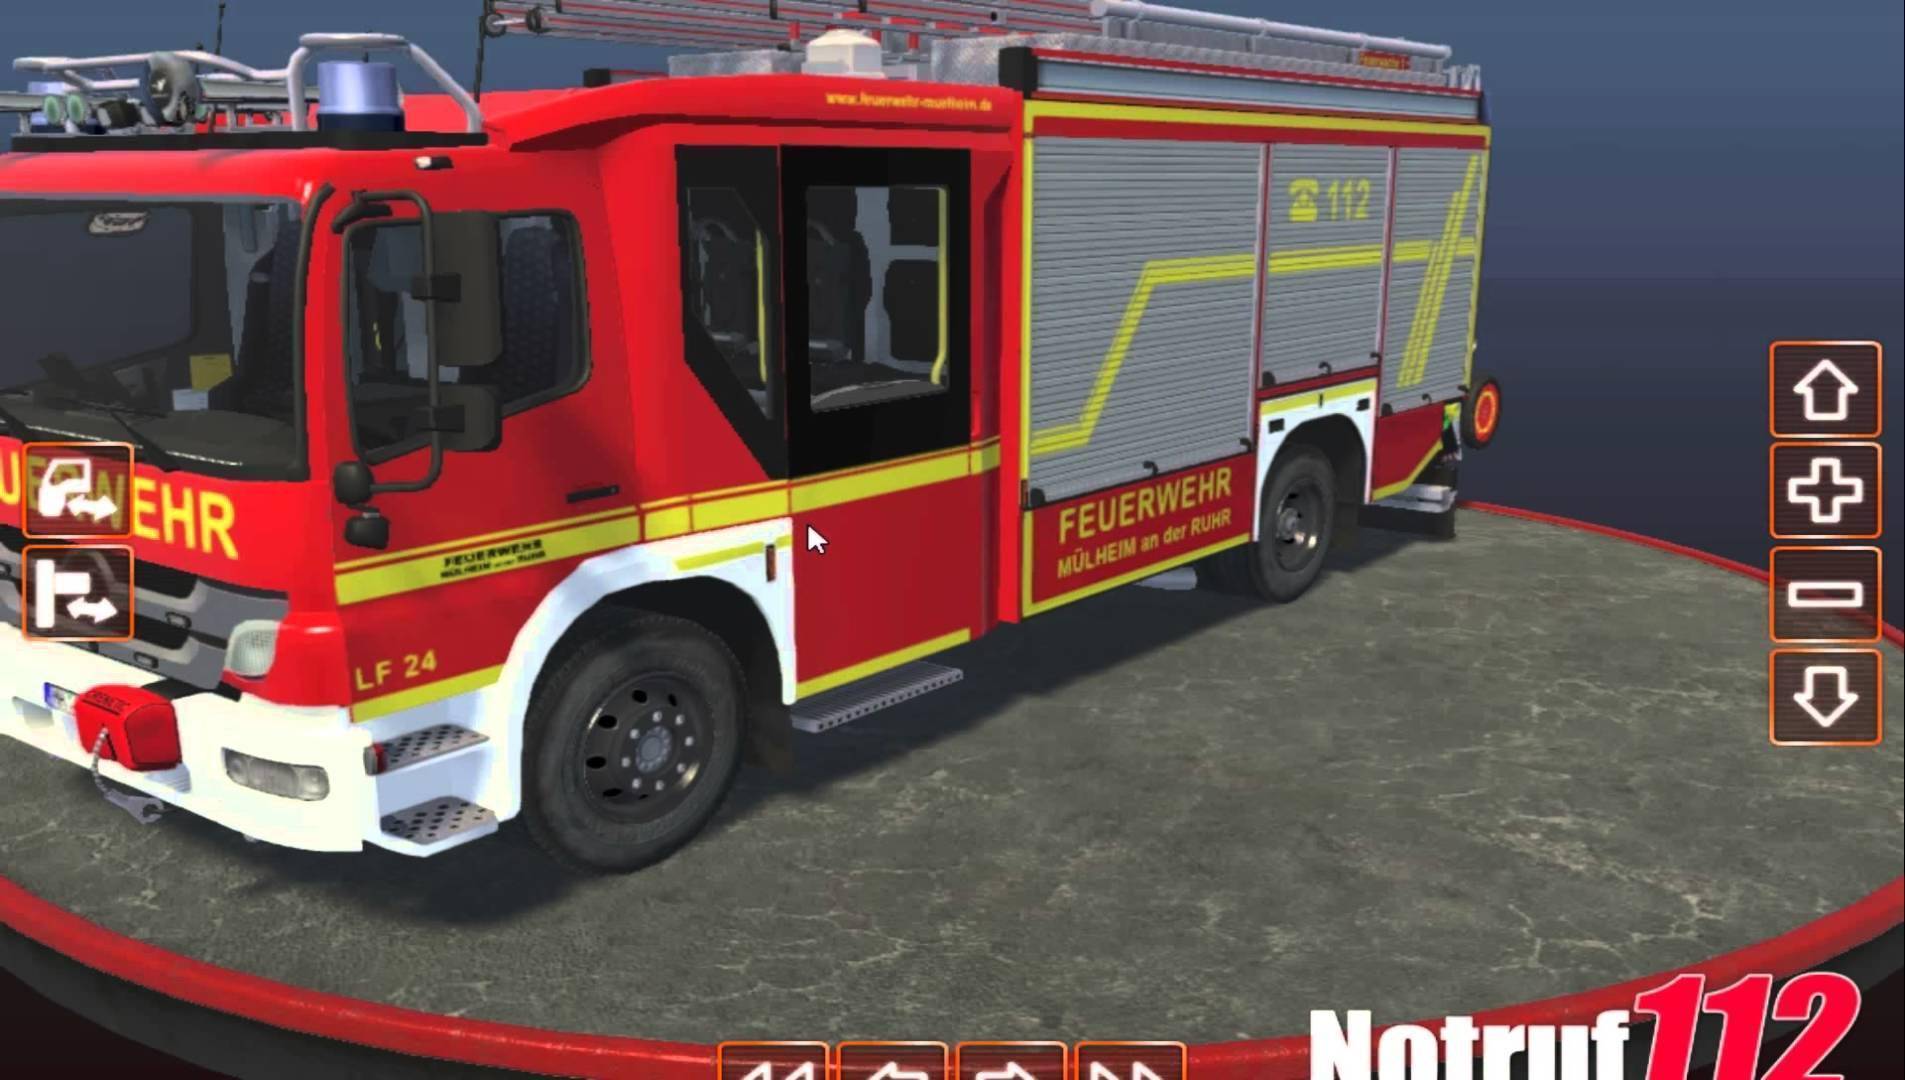 Emergency Call 112 The Fire cheap $6.31 Price Fighting - for Steam of (PC) Simulation Key